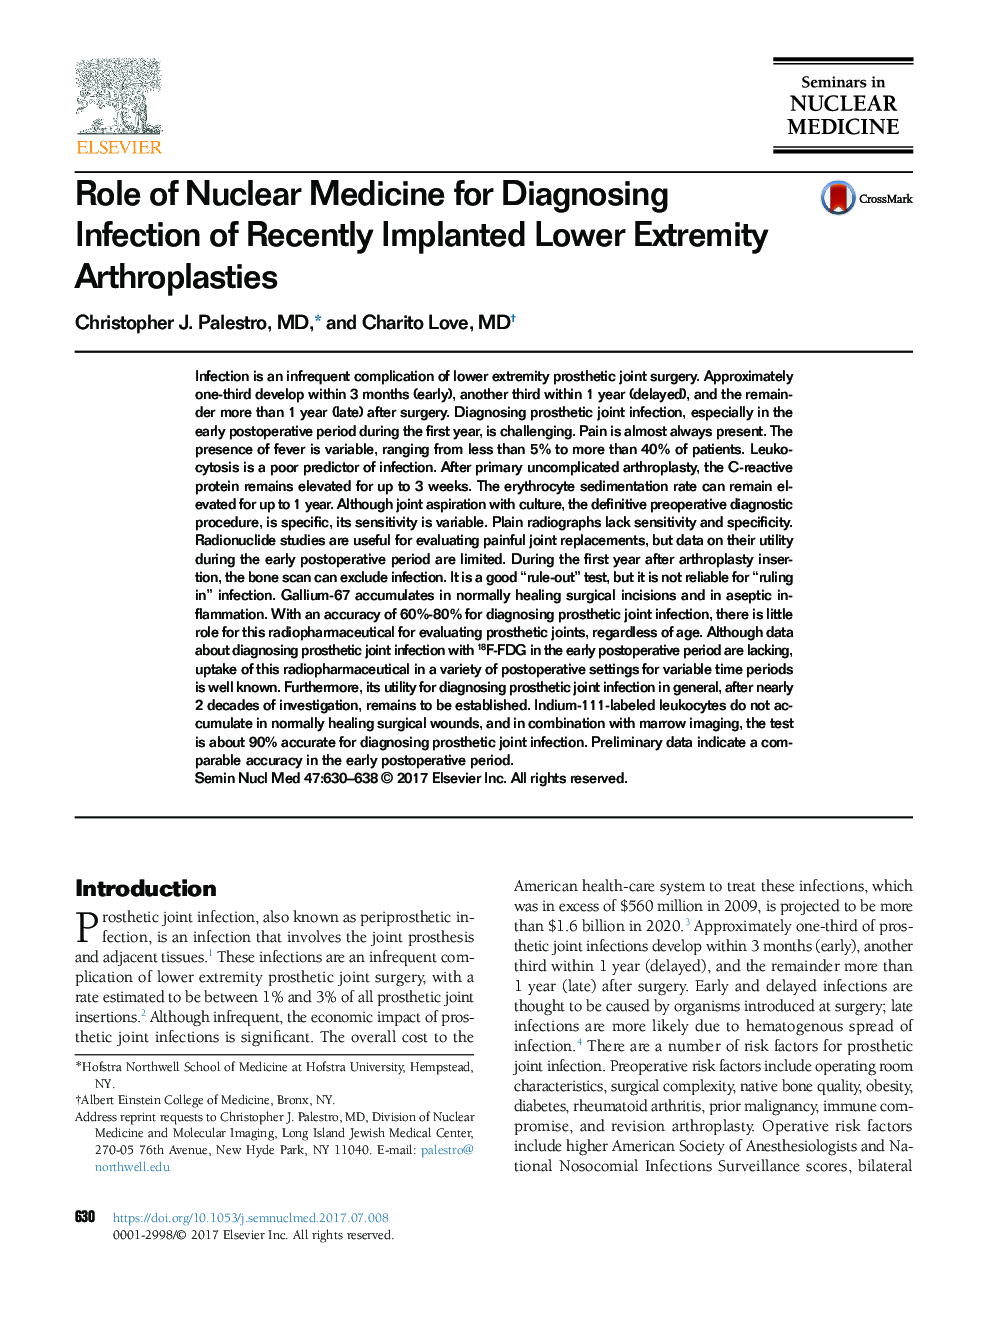 Role of Nuclear Medicine for Diagnosing Infection of Recently Implanted Lower Extremity Arthroplasties